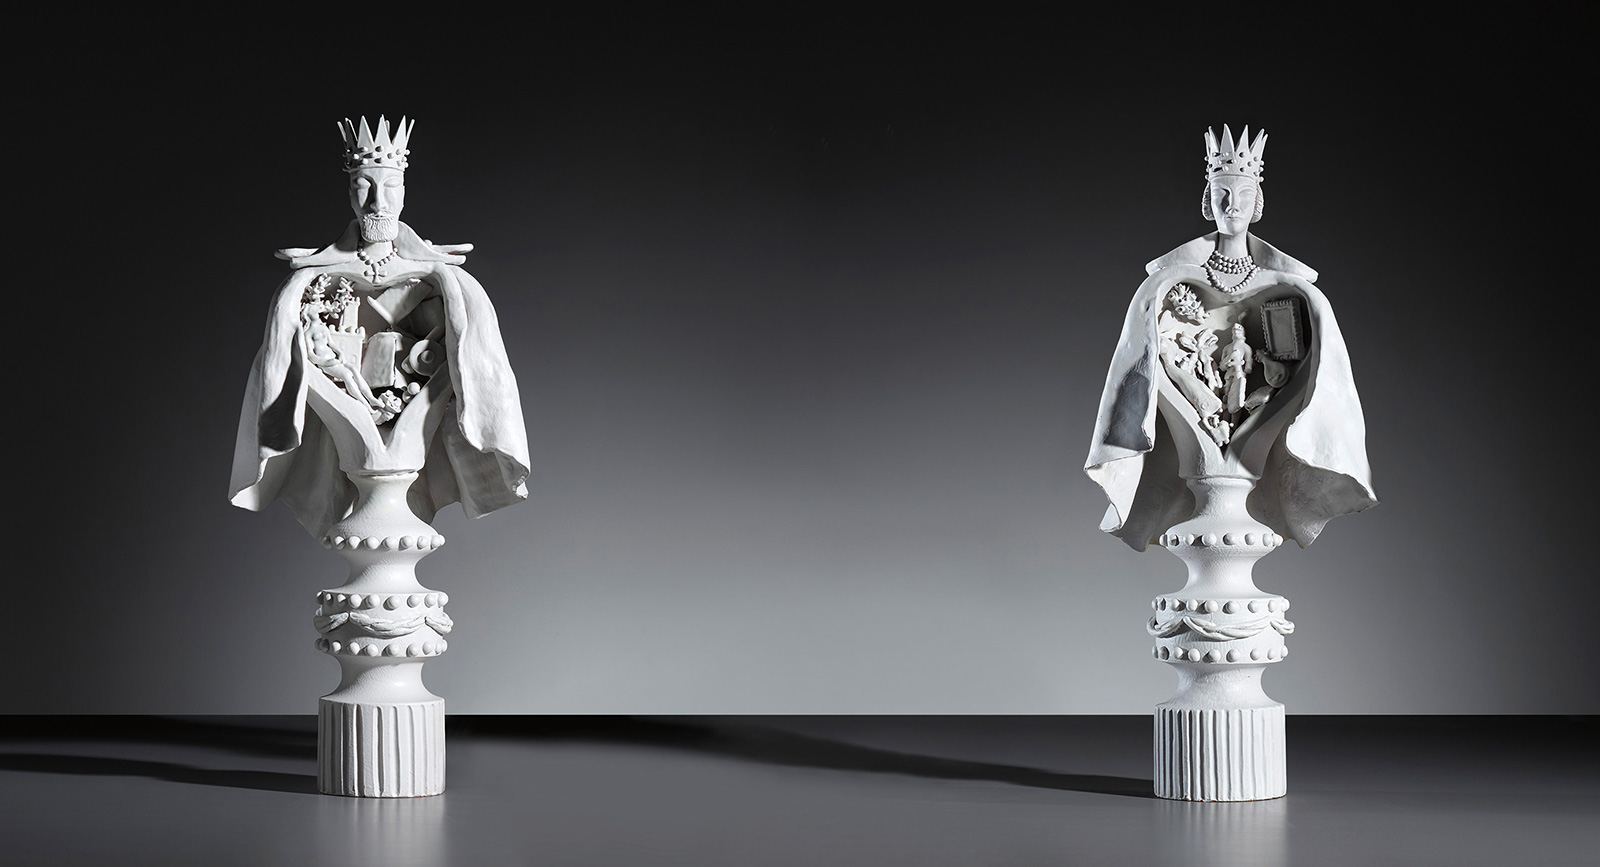 Lot 309: Large king and queen statuettes by Gio Ponti, circa 1951 Estimate: £15,000 - 20,000. Courtesy of Phillips